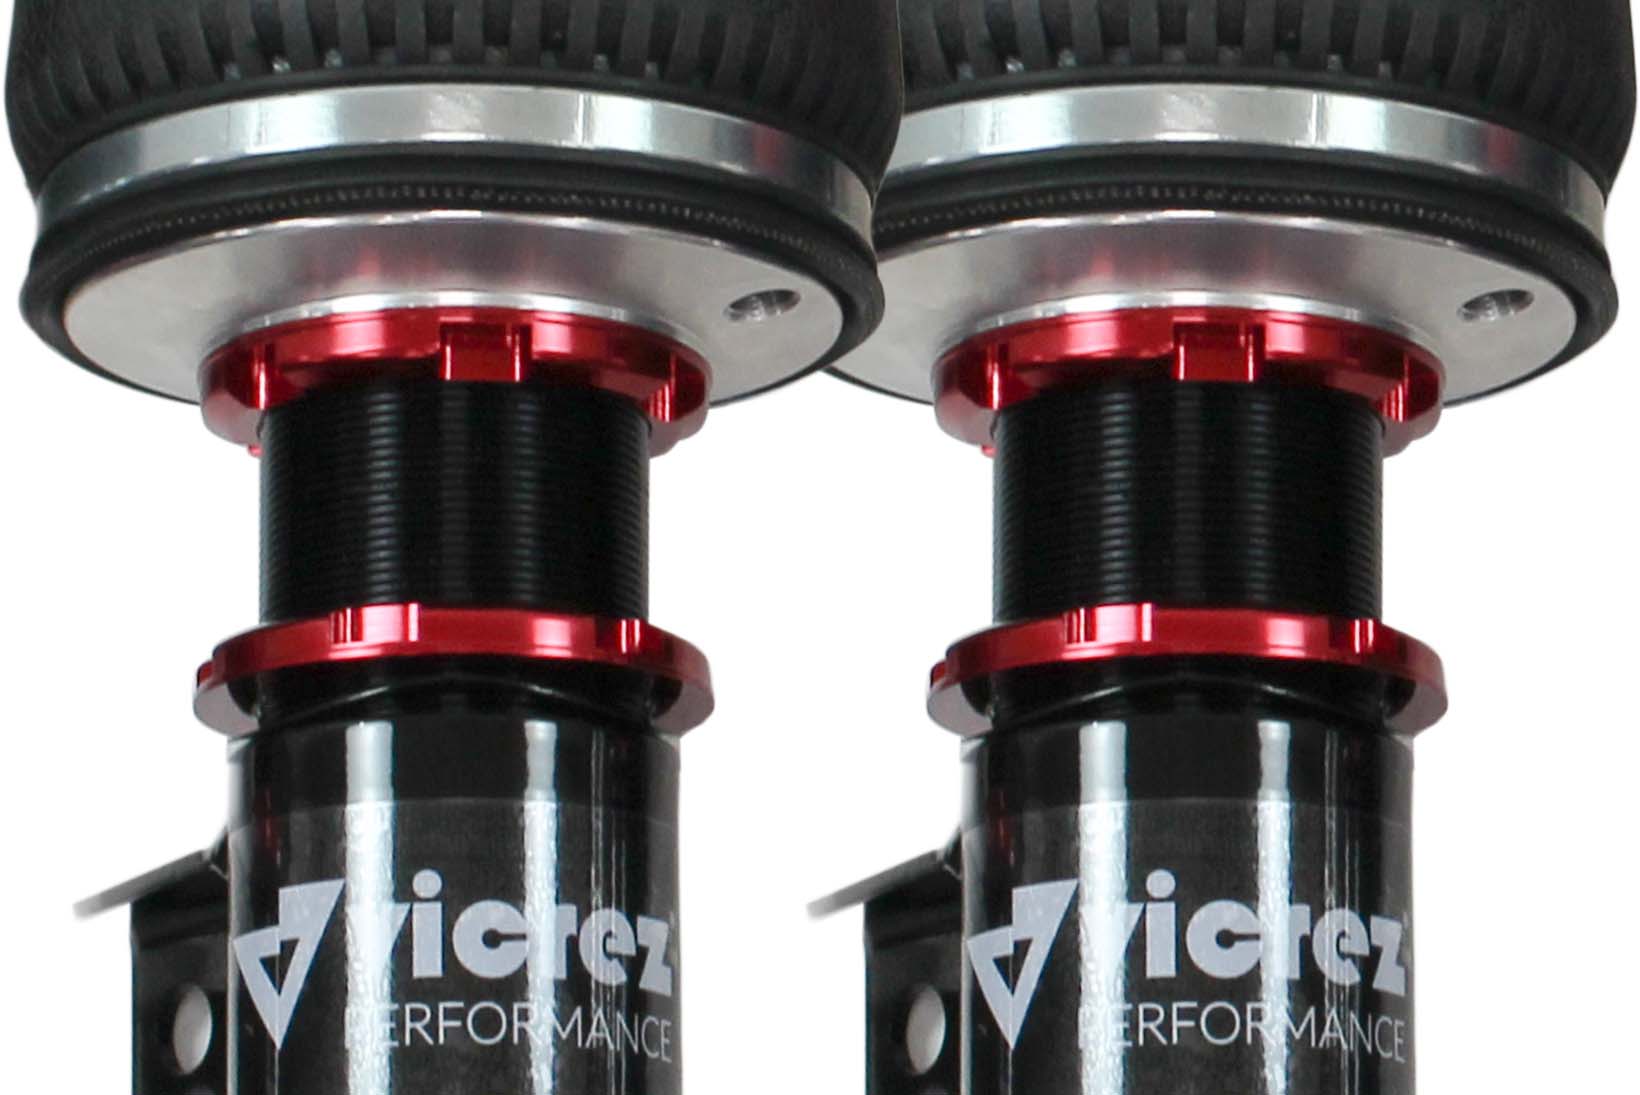 Vicrez Performance Air Struts with Bags Kits product image